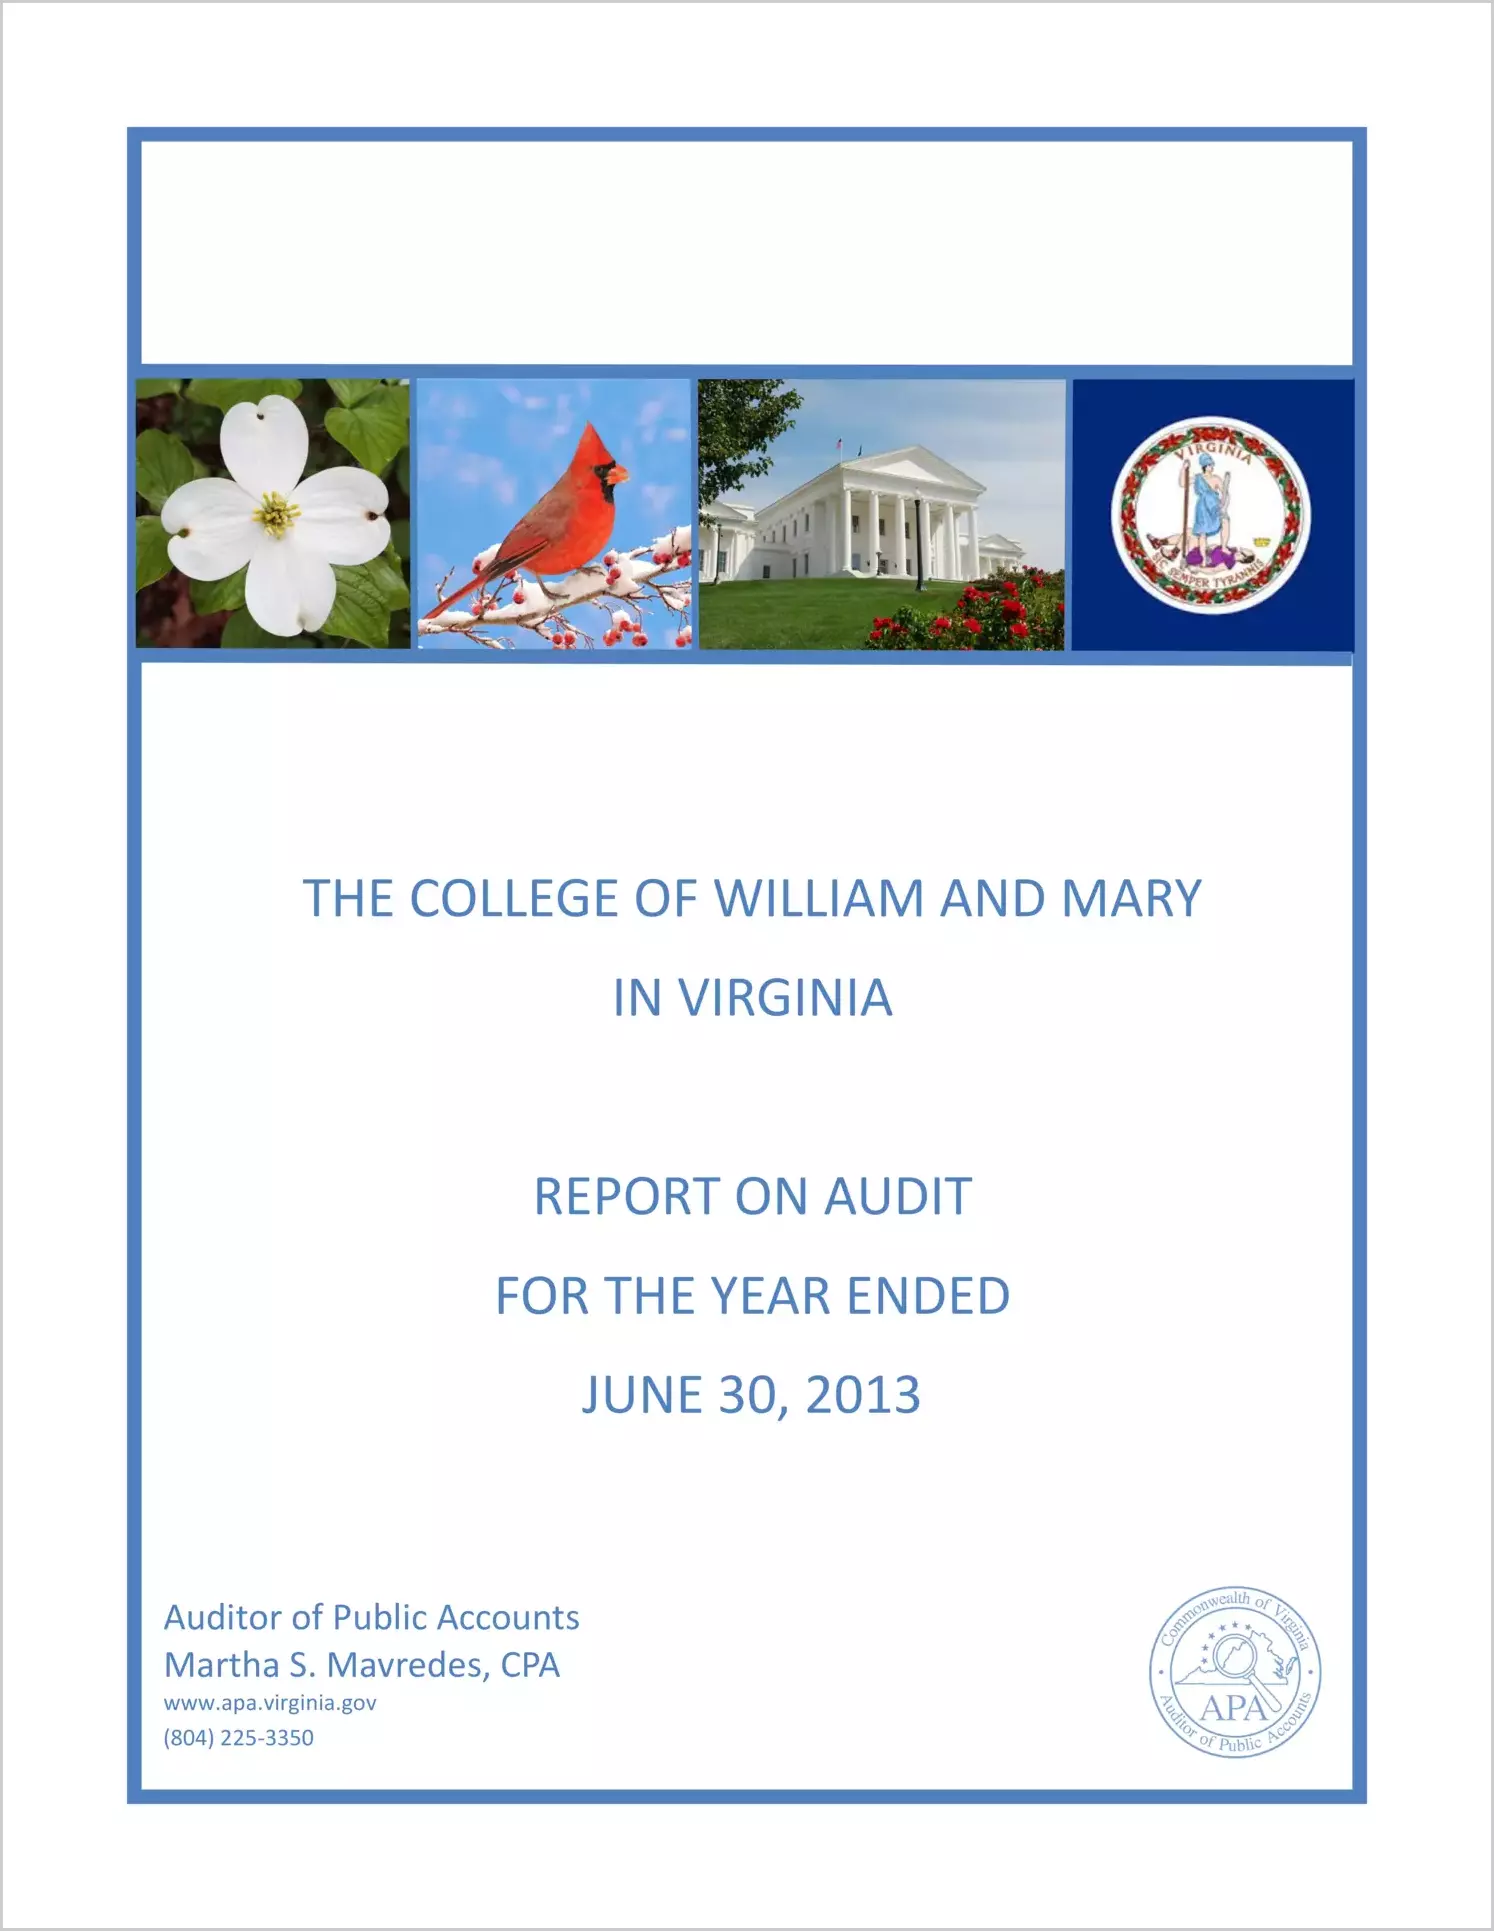 The College of William and Mary in Virginia for the year ended June 30, 2013